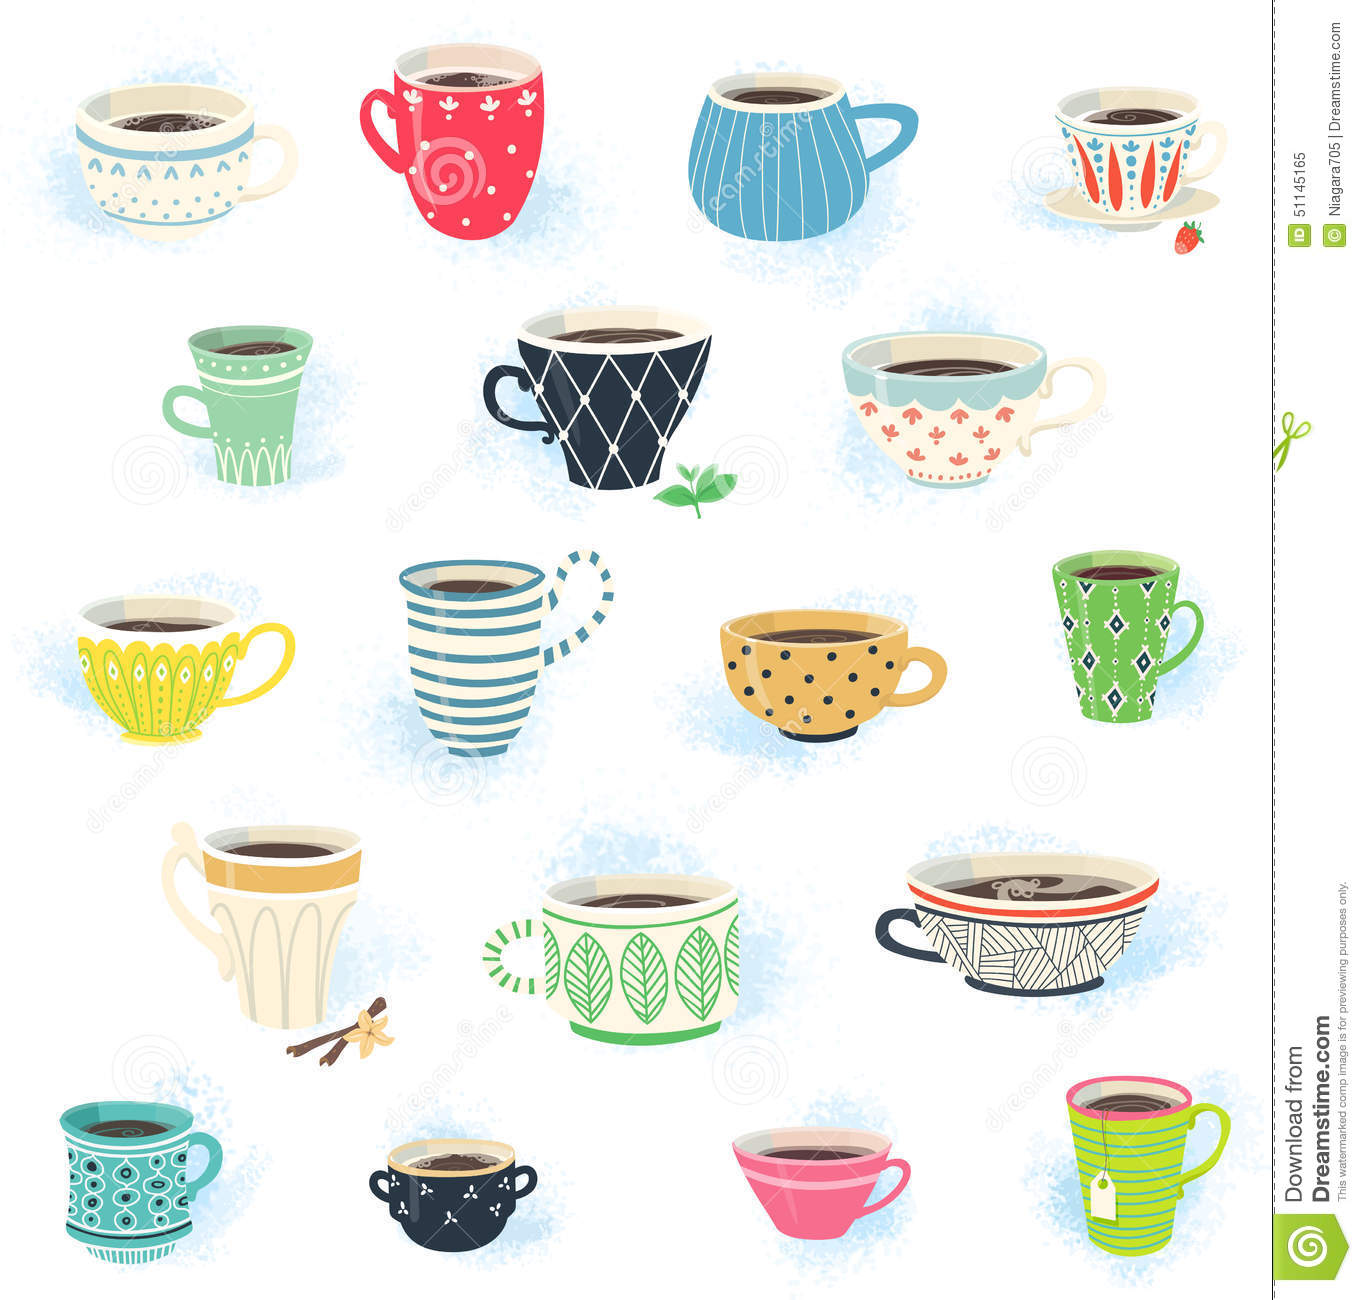 Clip Art Tea And Coffee Cup Collection Stock Vector   Image  51145165